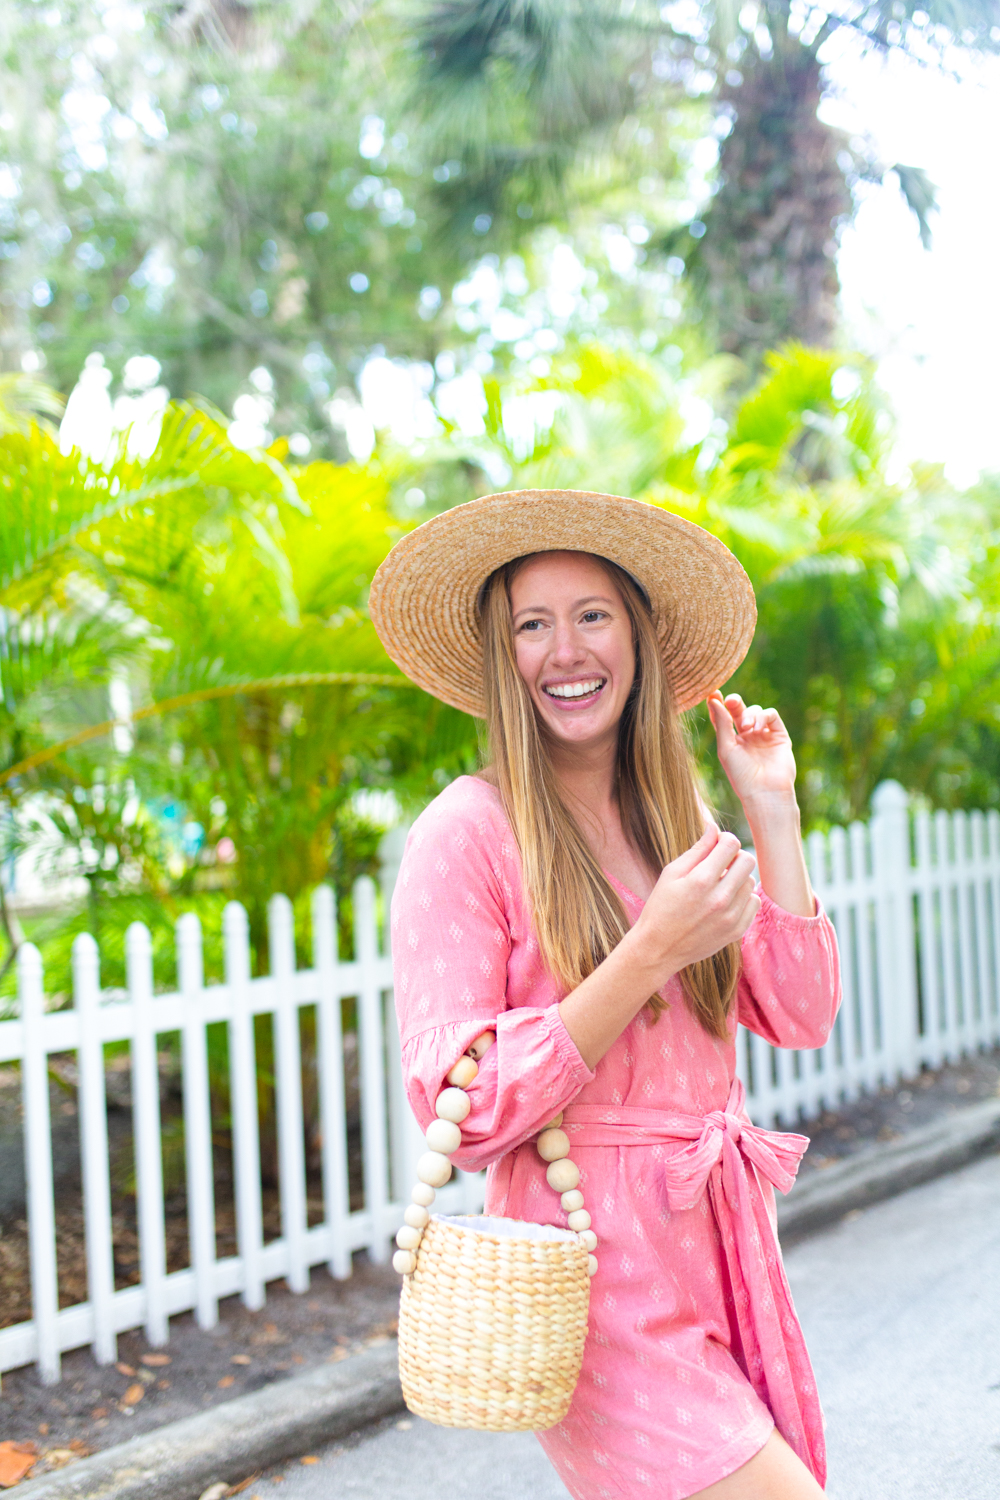 Affordable Rattan and Straw Accessories for Spring and Summer / Spring Jumpsuit / LOFT Romper / Pink Jumpsuit / How to Style Straw Accessories / Simple Spring Outfit / Spring Outfit Inspiration - Sunshine Style, A Florida Fashion and Lifestyle Blog by Katie McCarty